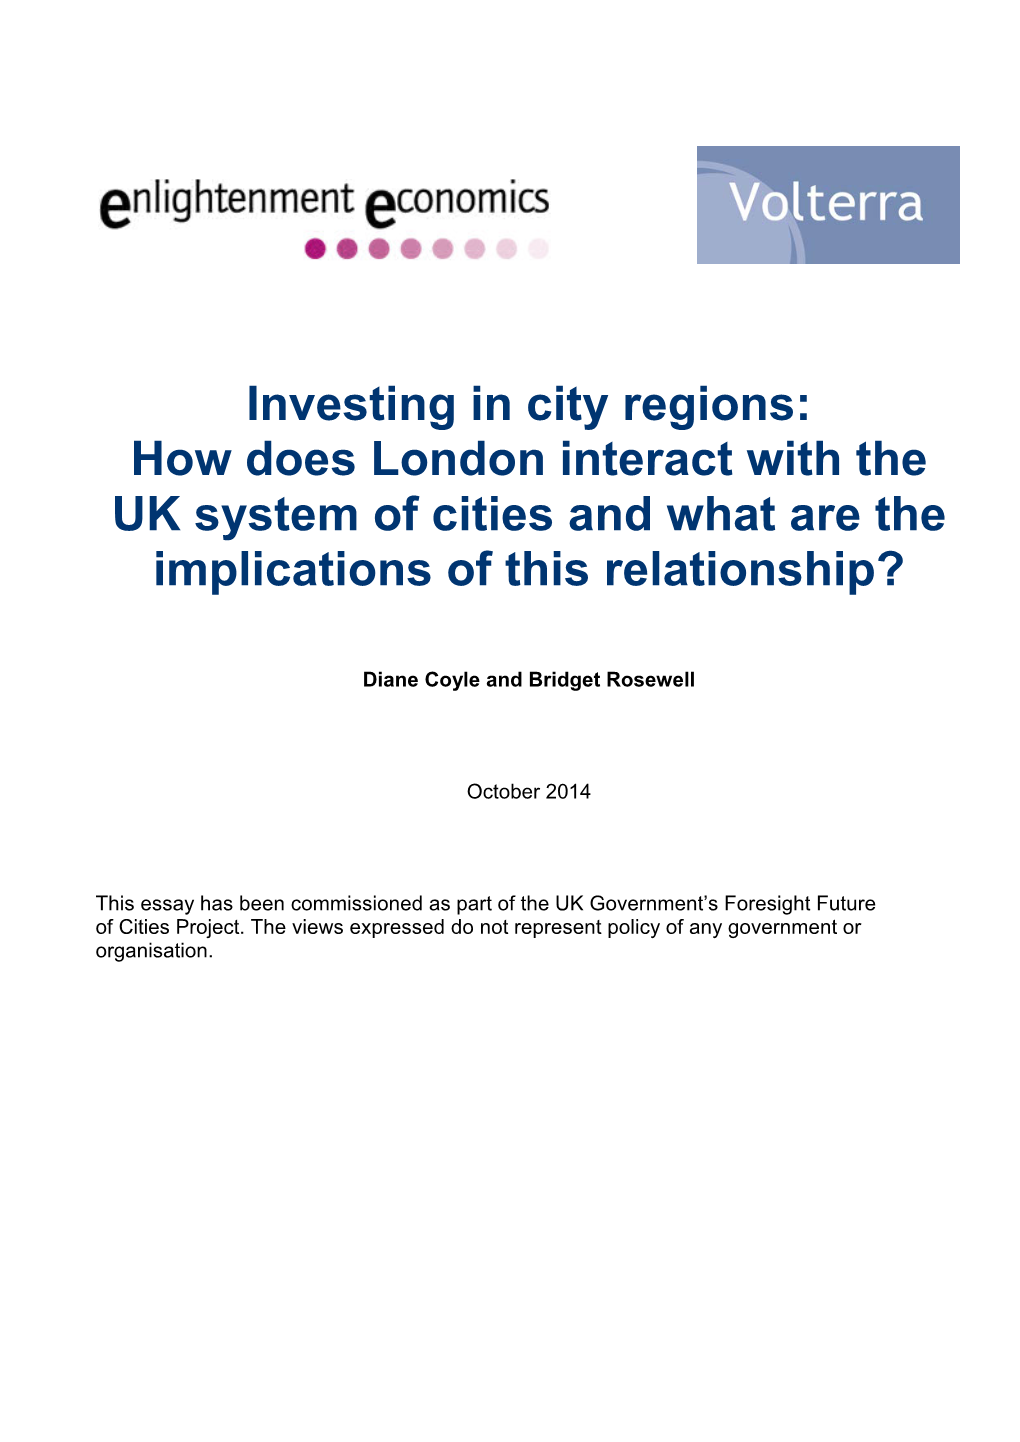 Investing in City Regions: How Does London Interact with the UK System of Cities and What Are the Implications of This Relationship?